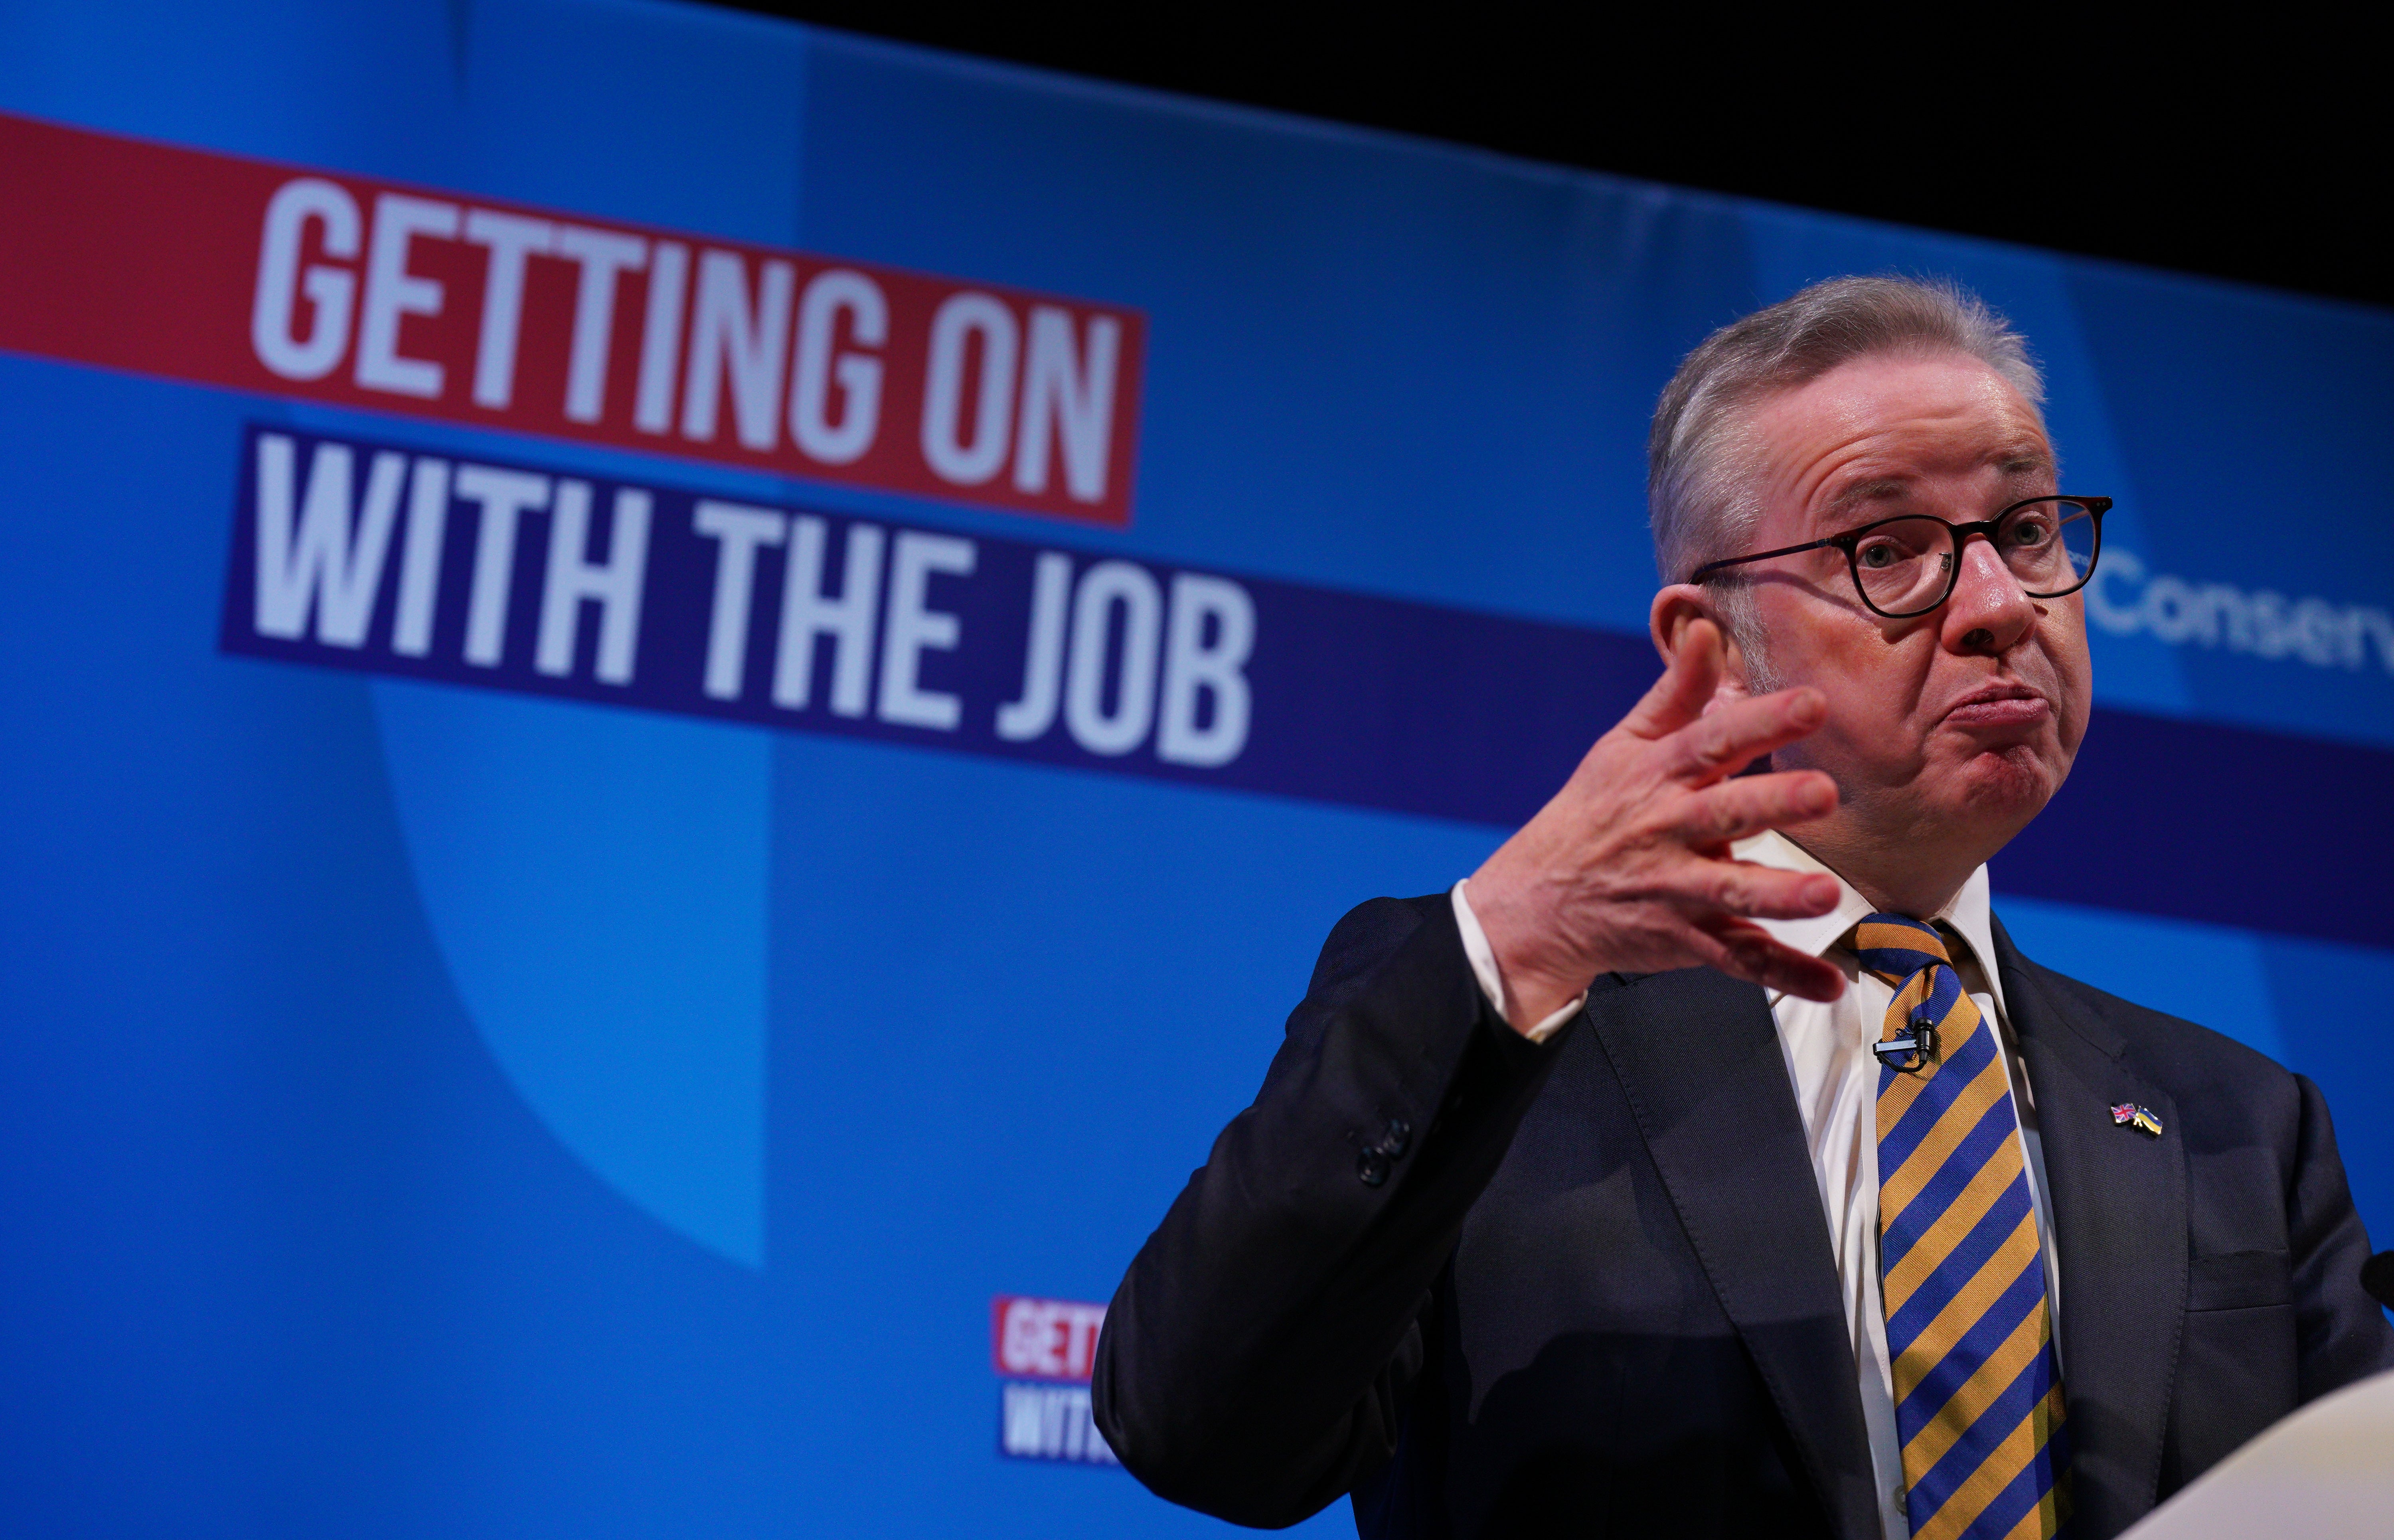 Minister Michael Gove (Peter Byrne/PA)